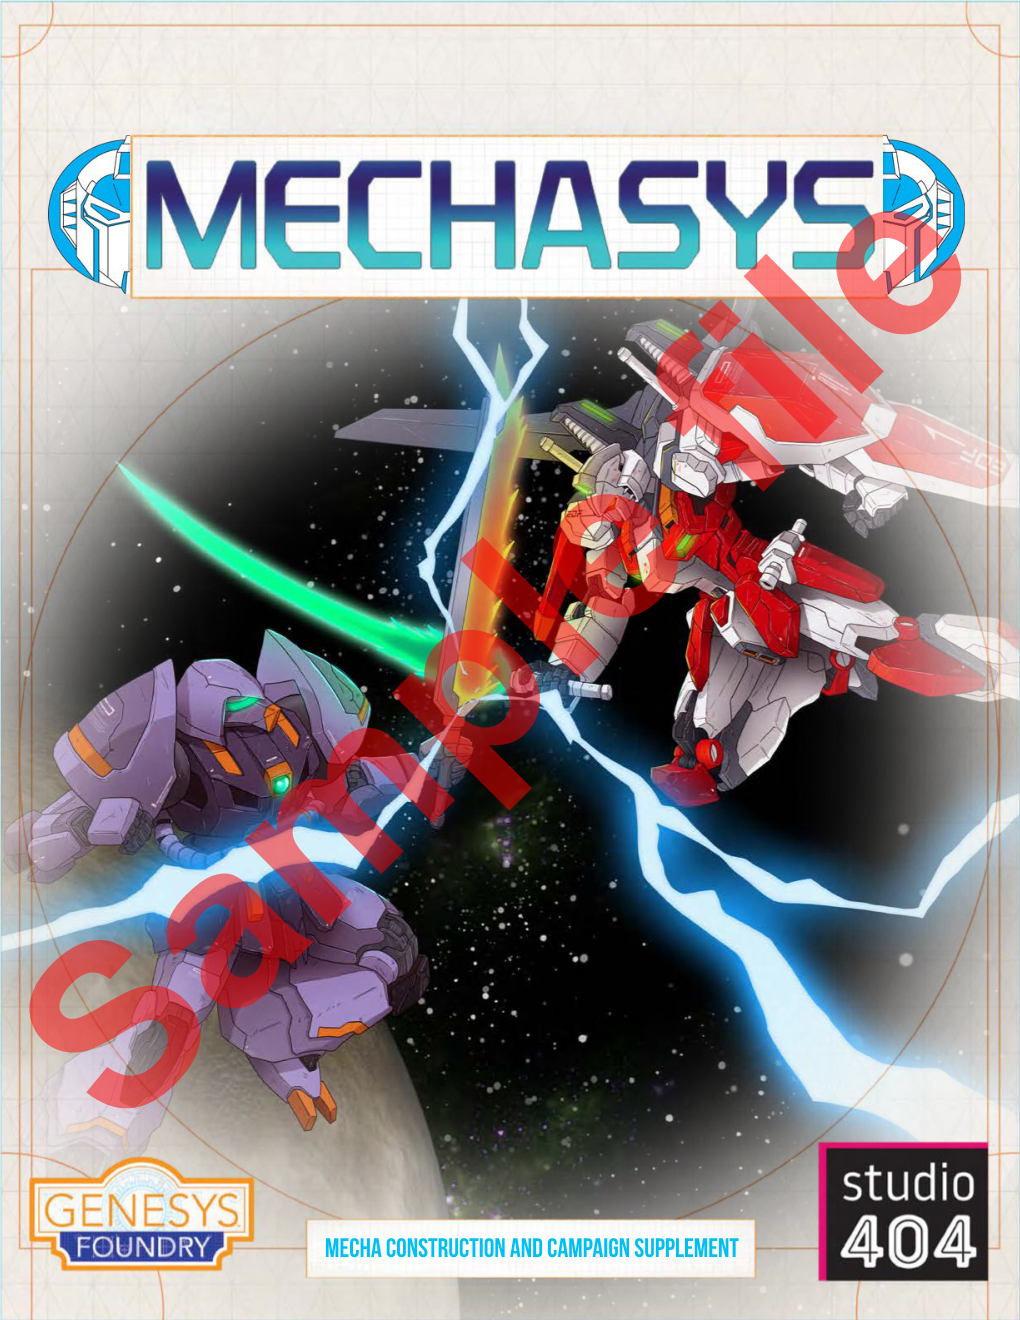 Mecha Construction and Campaign Supplement